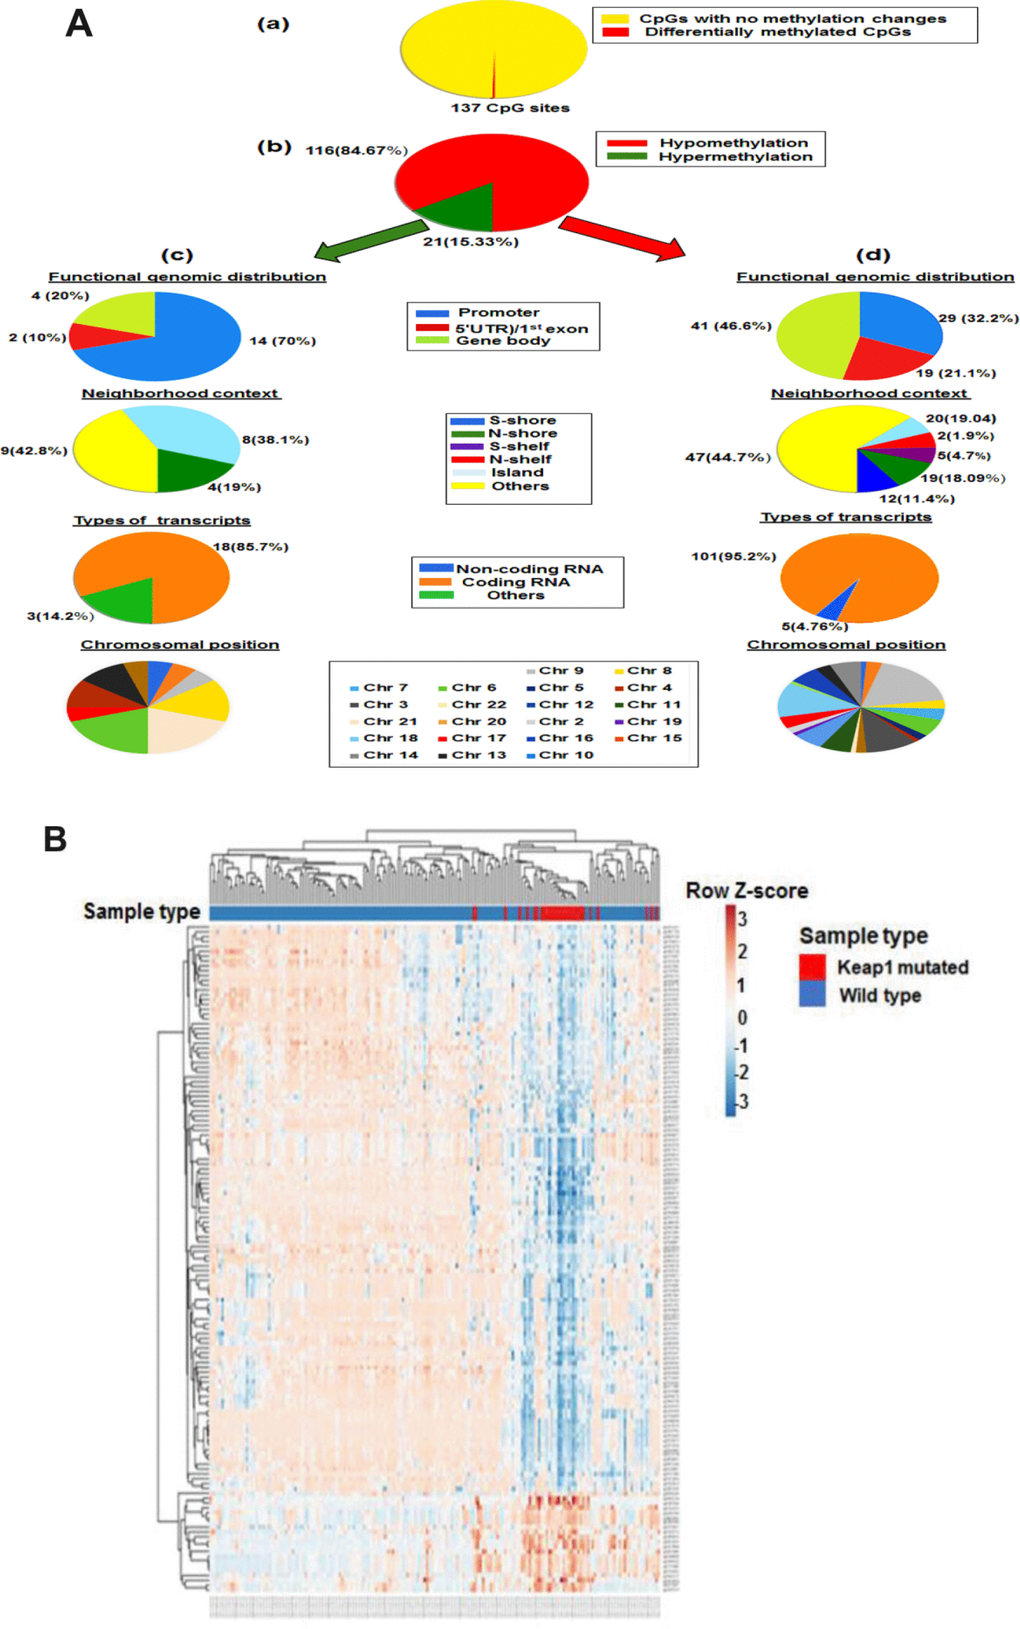 Differential methylation analysis of KEAP1-mutated vs wild-type LUAD patients. (A) Graphic showing 450k DNA methylation analysis. (a) Differentially-methylated CpG sites in KEAP1-mutated vs wild-type patient samples. (b) Percentages of hypomethylation and hypermethylation. (c) Distribution of hypermethylated CpG sites in KEAP1-mutated patient samples according to functional genomic distribution, neighborhood context, associated RNA transcripts, and chromosomal location. (d) Distribution of hypomethylated CpG sites in KEAP1-mutated patient samples according to functional genomic distribution, neighborhood context, associated RNA transcripts, and chromosomal location. (B) Heatmap showing the differentially-methylated CpG sites in KEAP1-mutated LUAD patients compared to their wild type counterparts (delta β >|0.2|, p